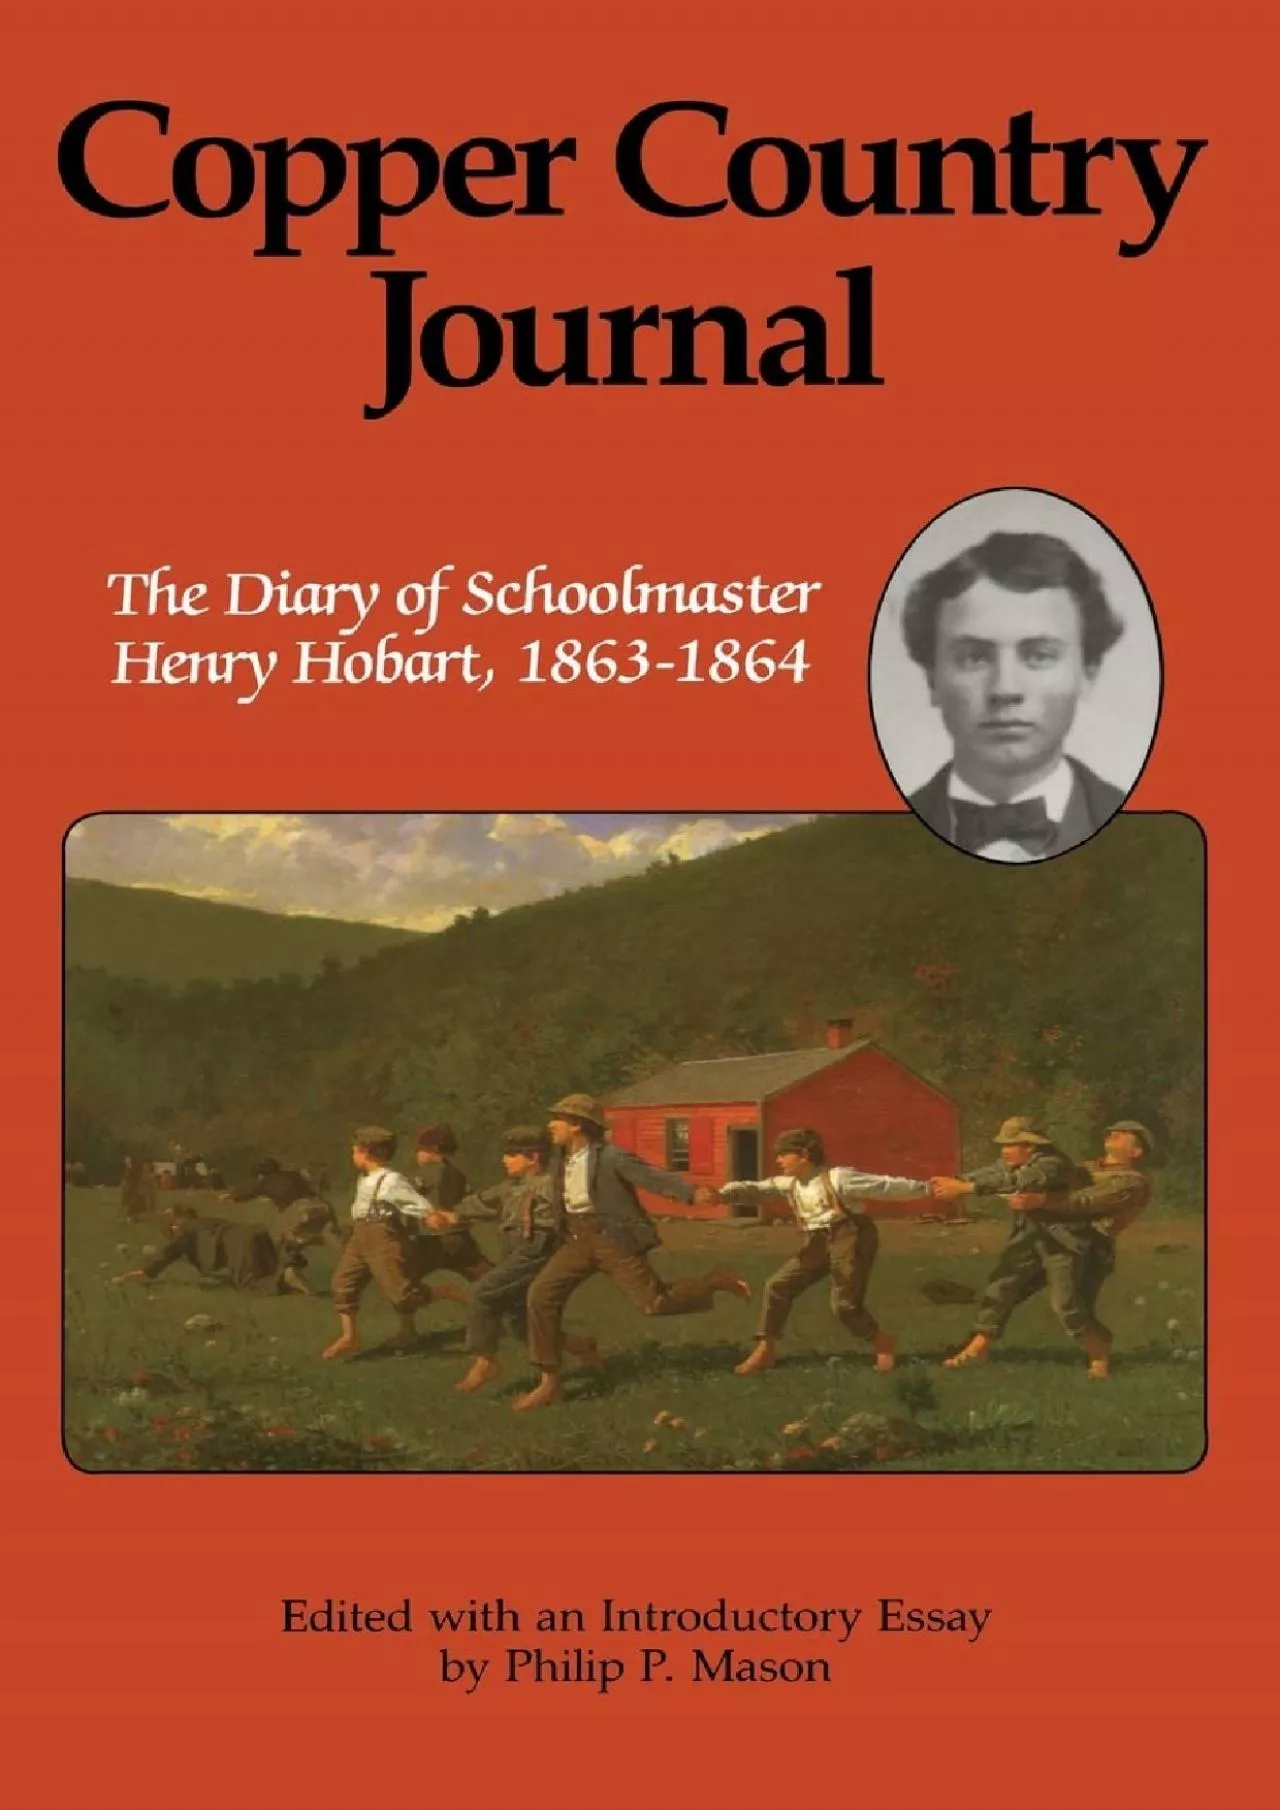 [BOOK]-Copper Country Journal: The Diary of Schoolmaster Henry Hobart, 1863-1864 (Great